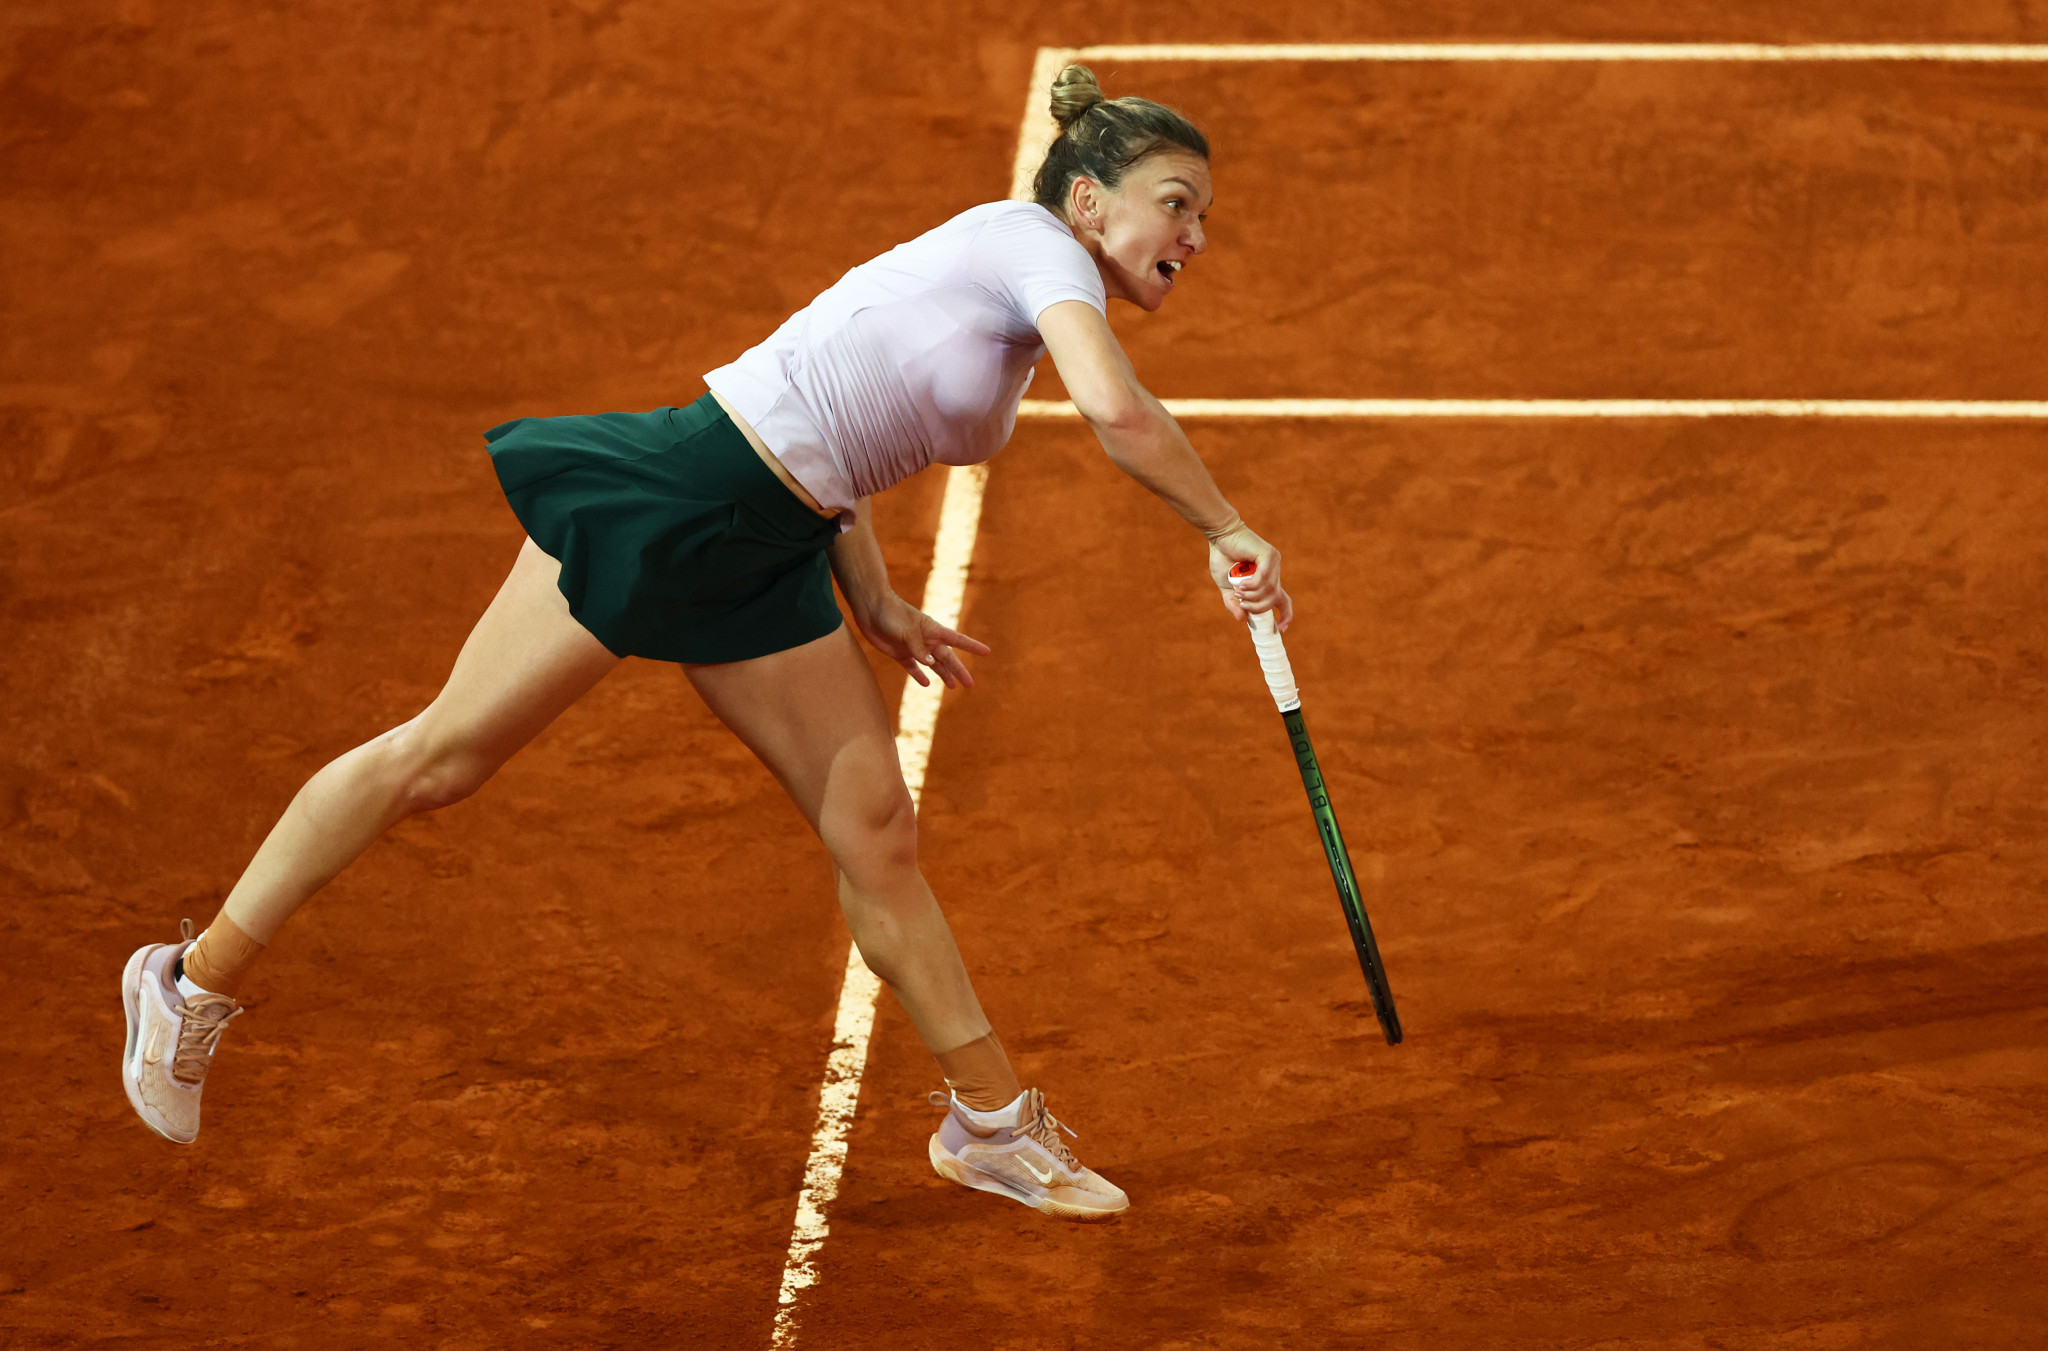 Halep charges past Gauff to reach Madrid Open tennis quarter-finals